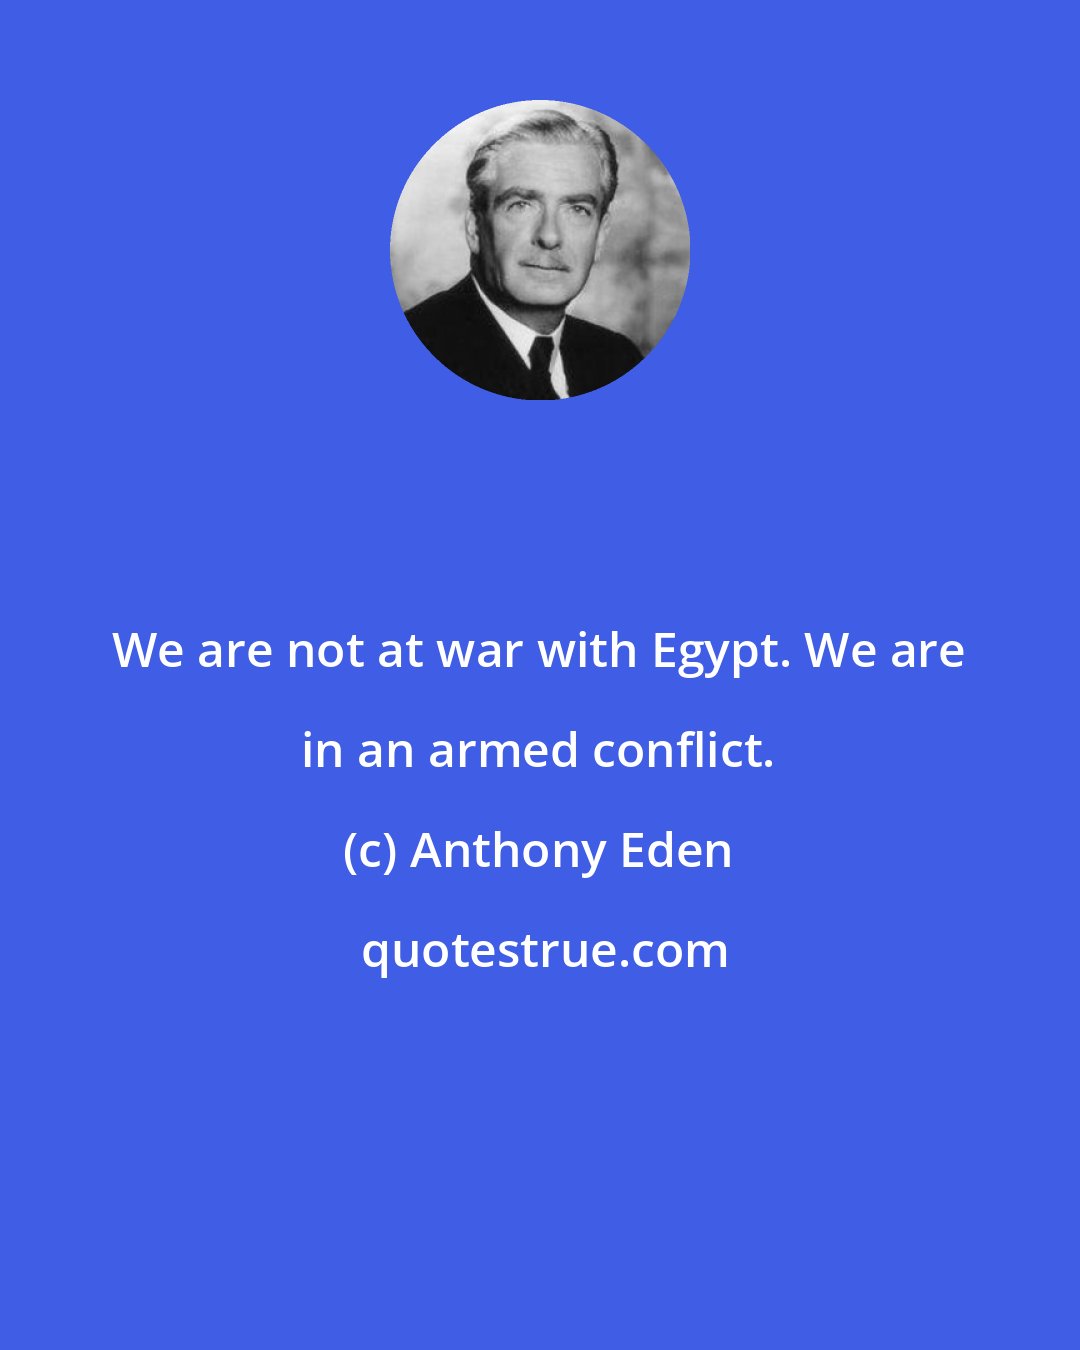 Anthony Eden: We are not at war with Egypt. We are in an armed conflict.